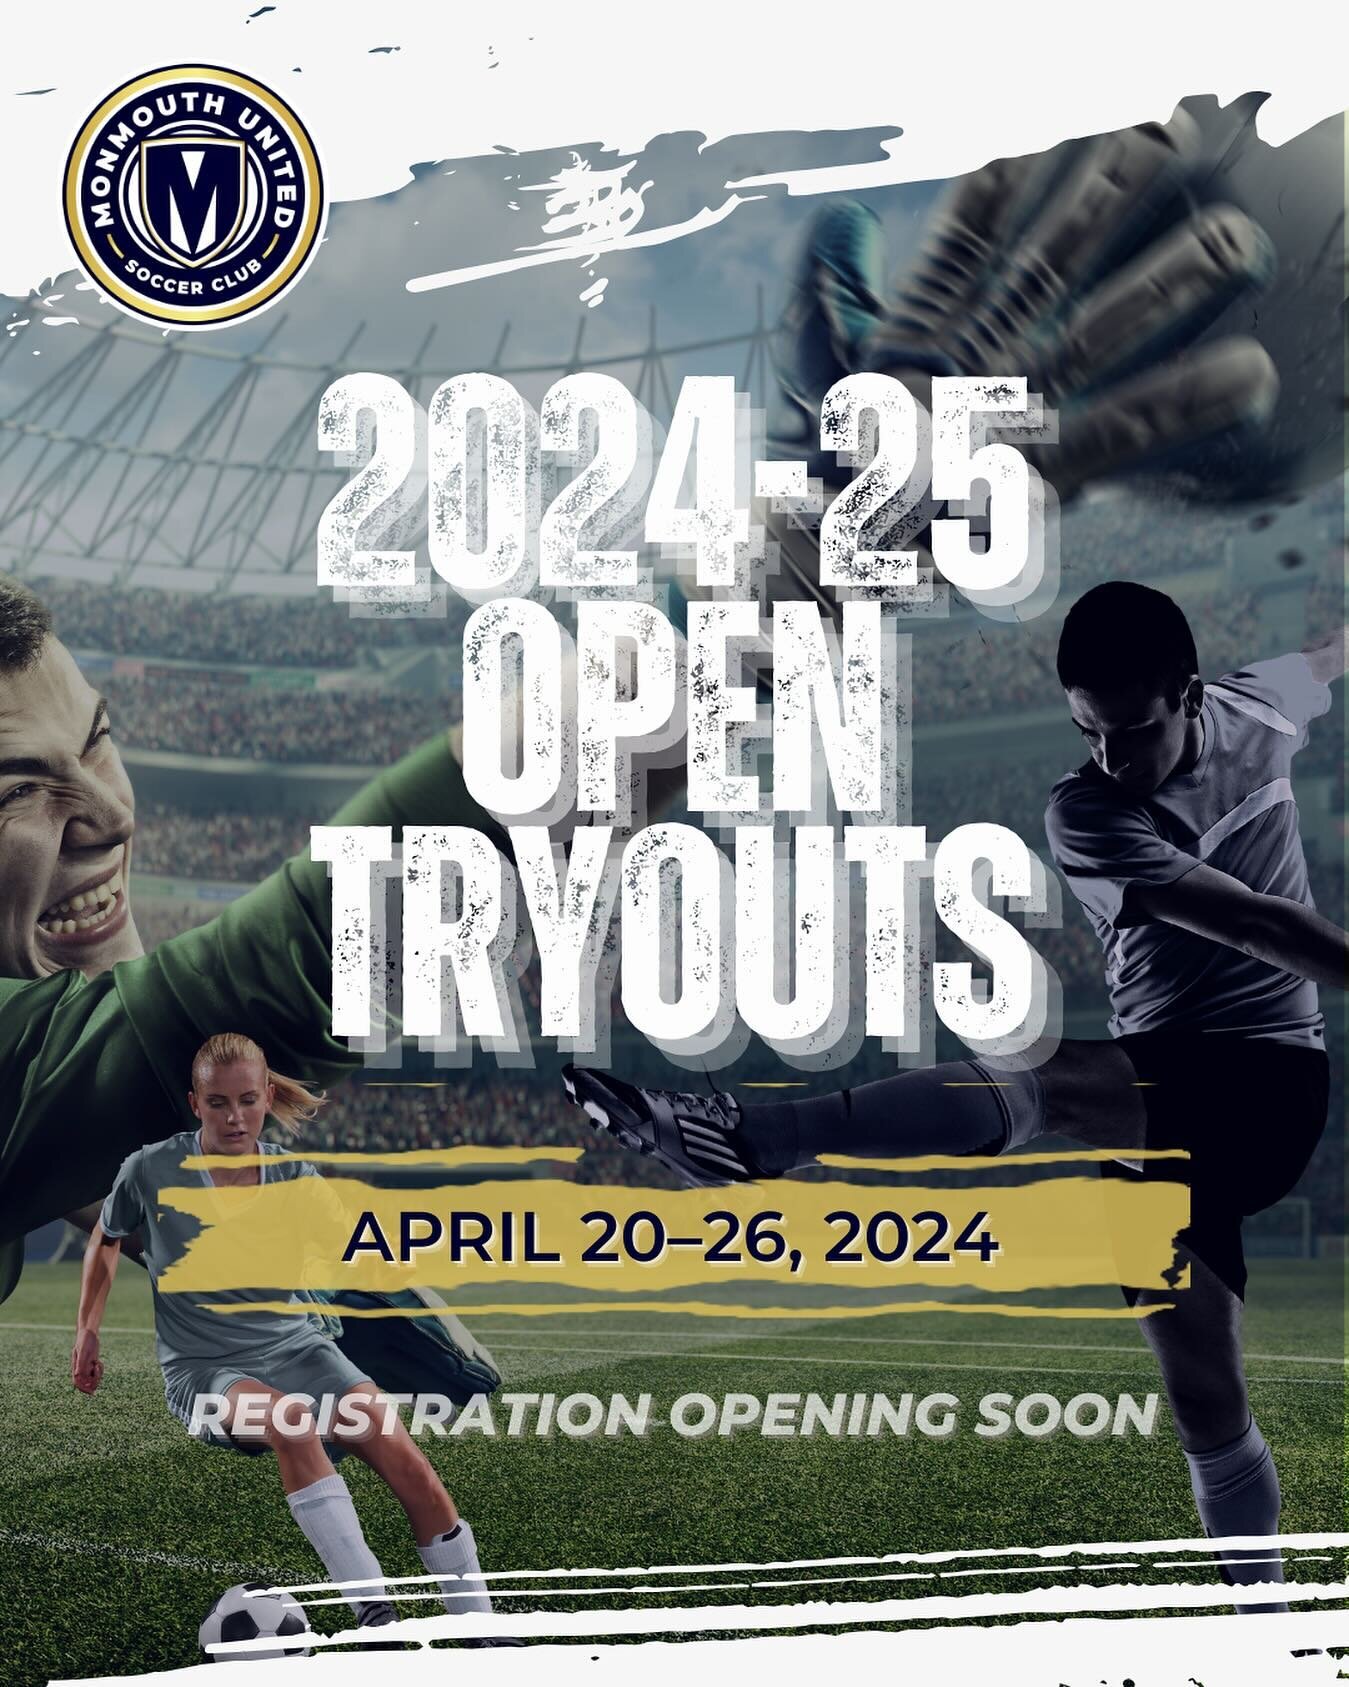 Announcing our 2024-25 season tryout dates!! Two sessions per age group running from 4/20-4/26&hellip;

🔹 Session 1: Saturday 4/20 | Normandy Park, Middletown
🔹 Session 2: Throughout 4/22 week during the evening | Multiple Middletown locations incl